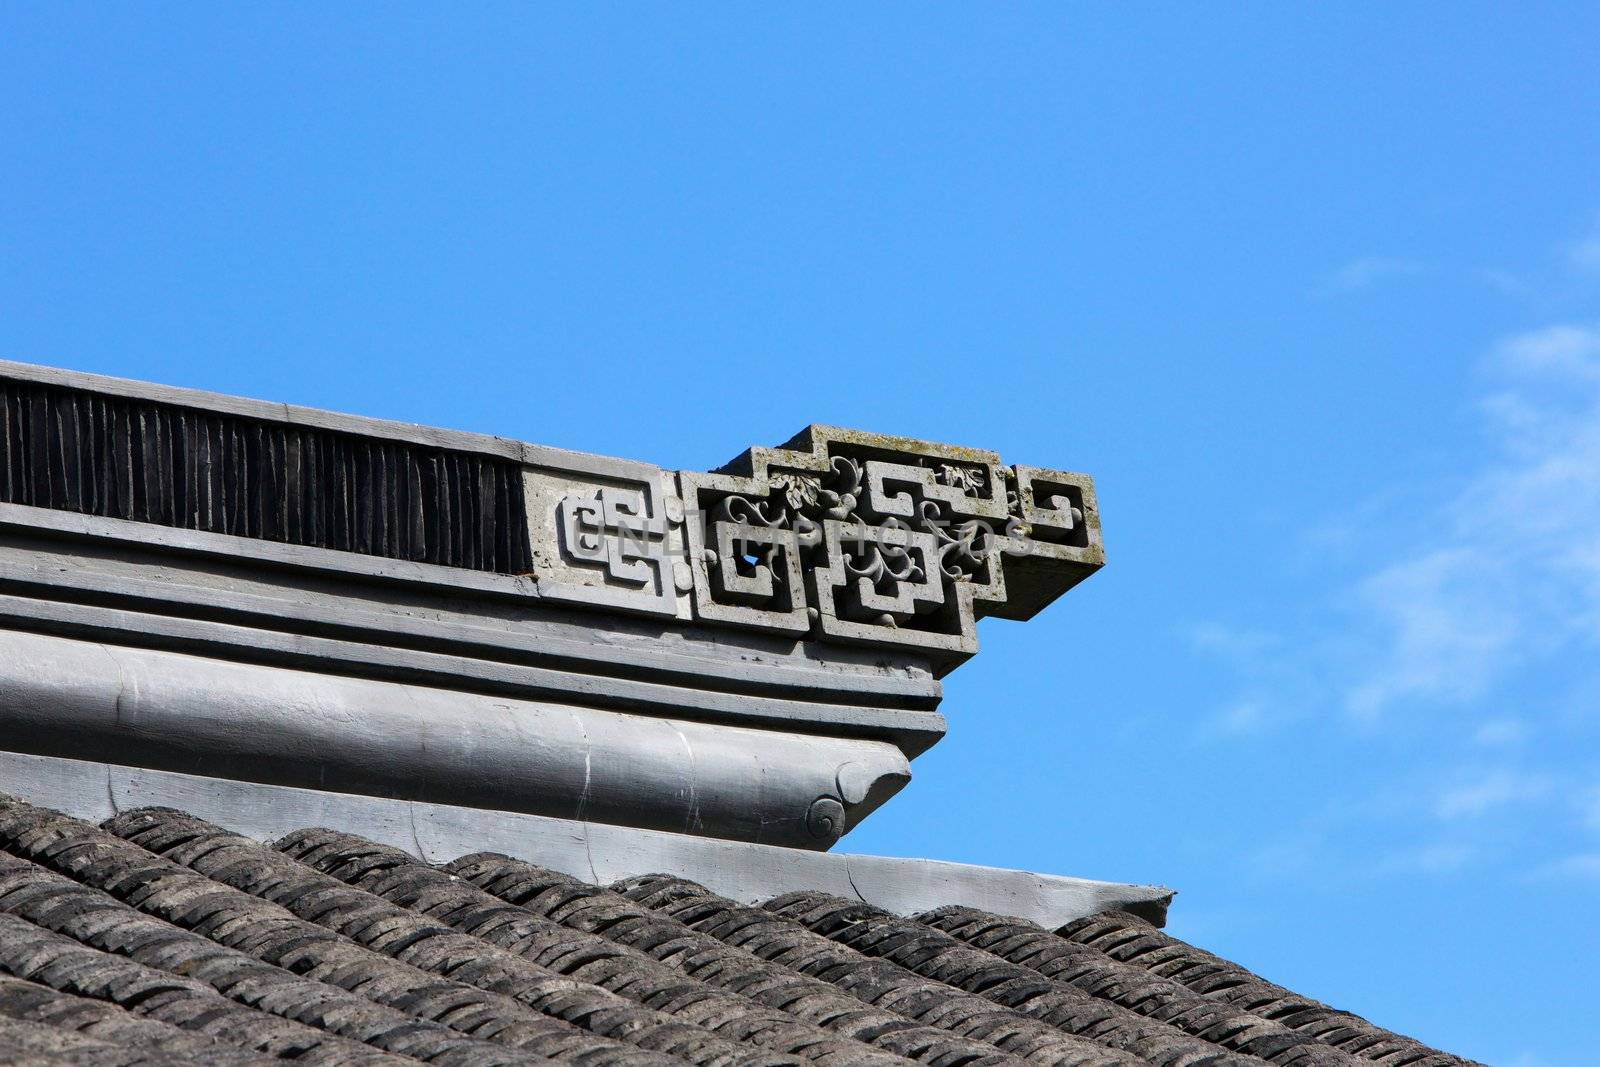 Asian design ornamentation on a chinese tile roof againt blue sky